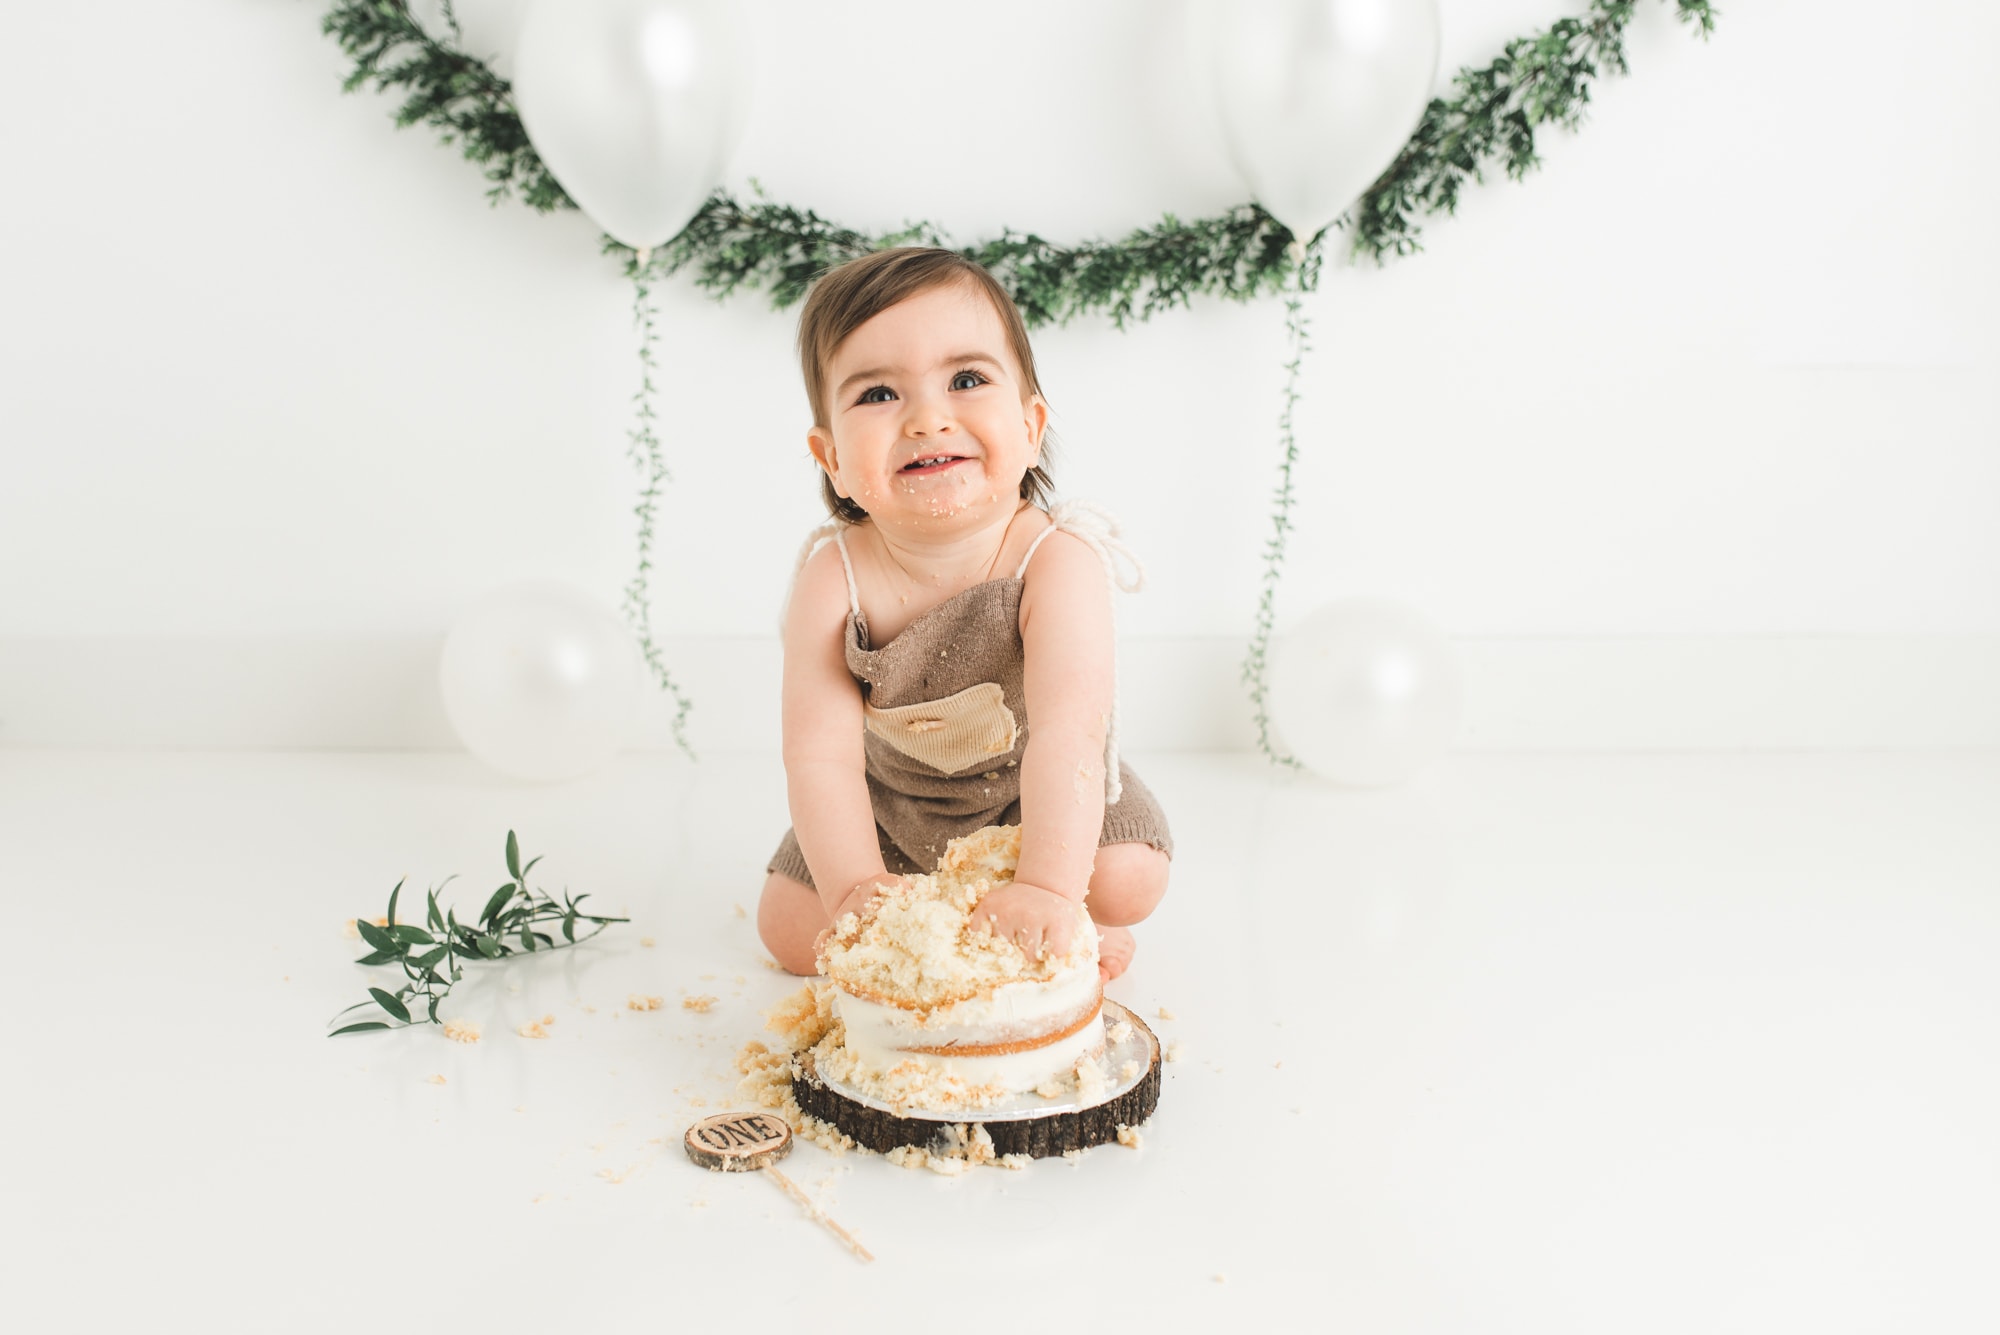 Toddler boy smashing his cake in a white studio with natural elements